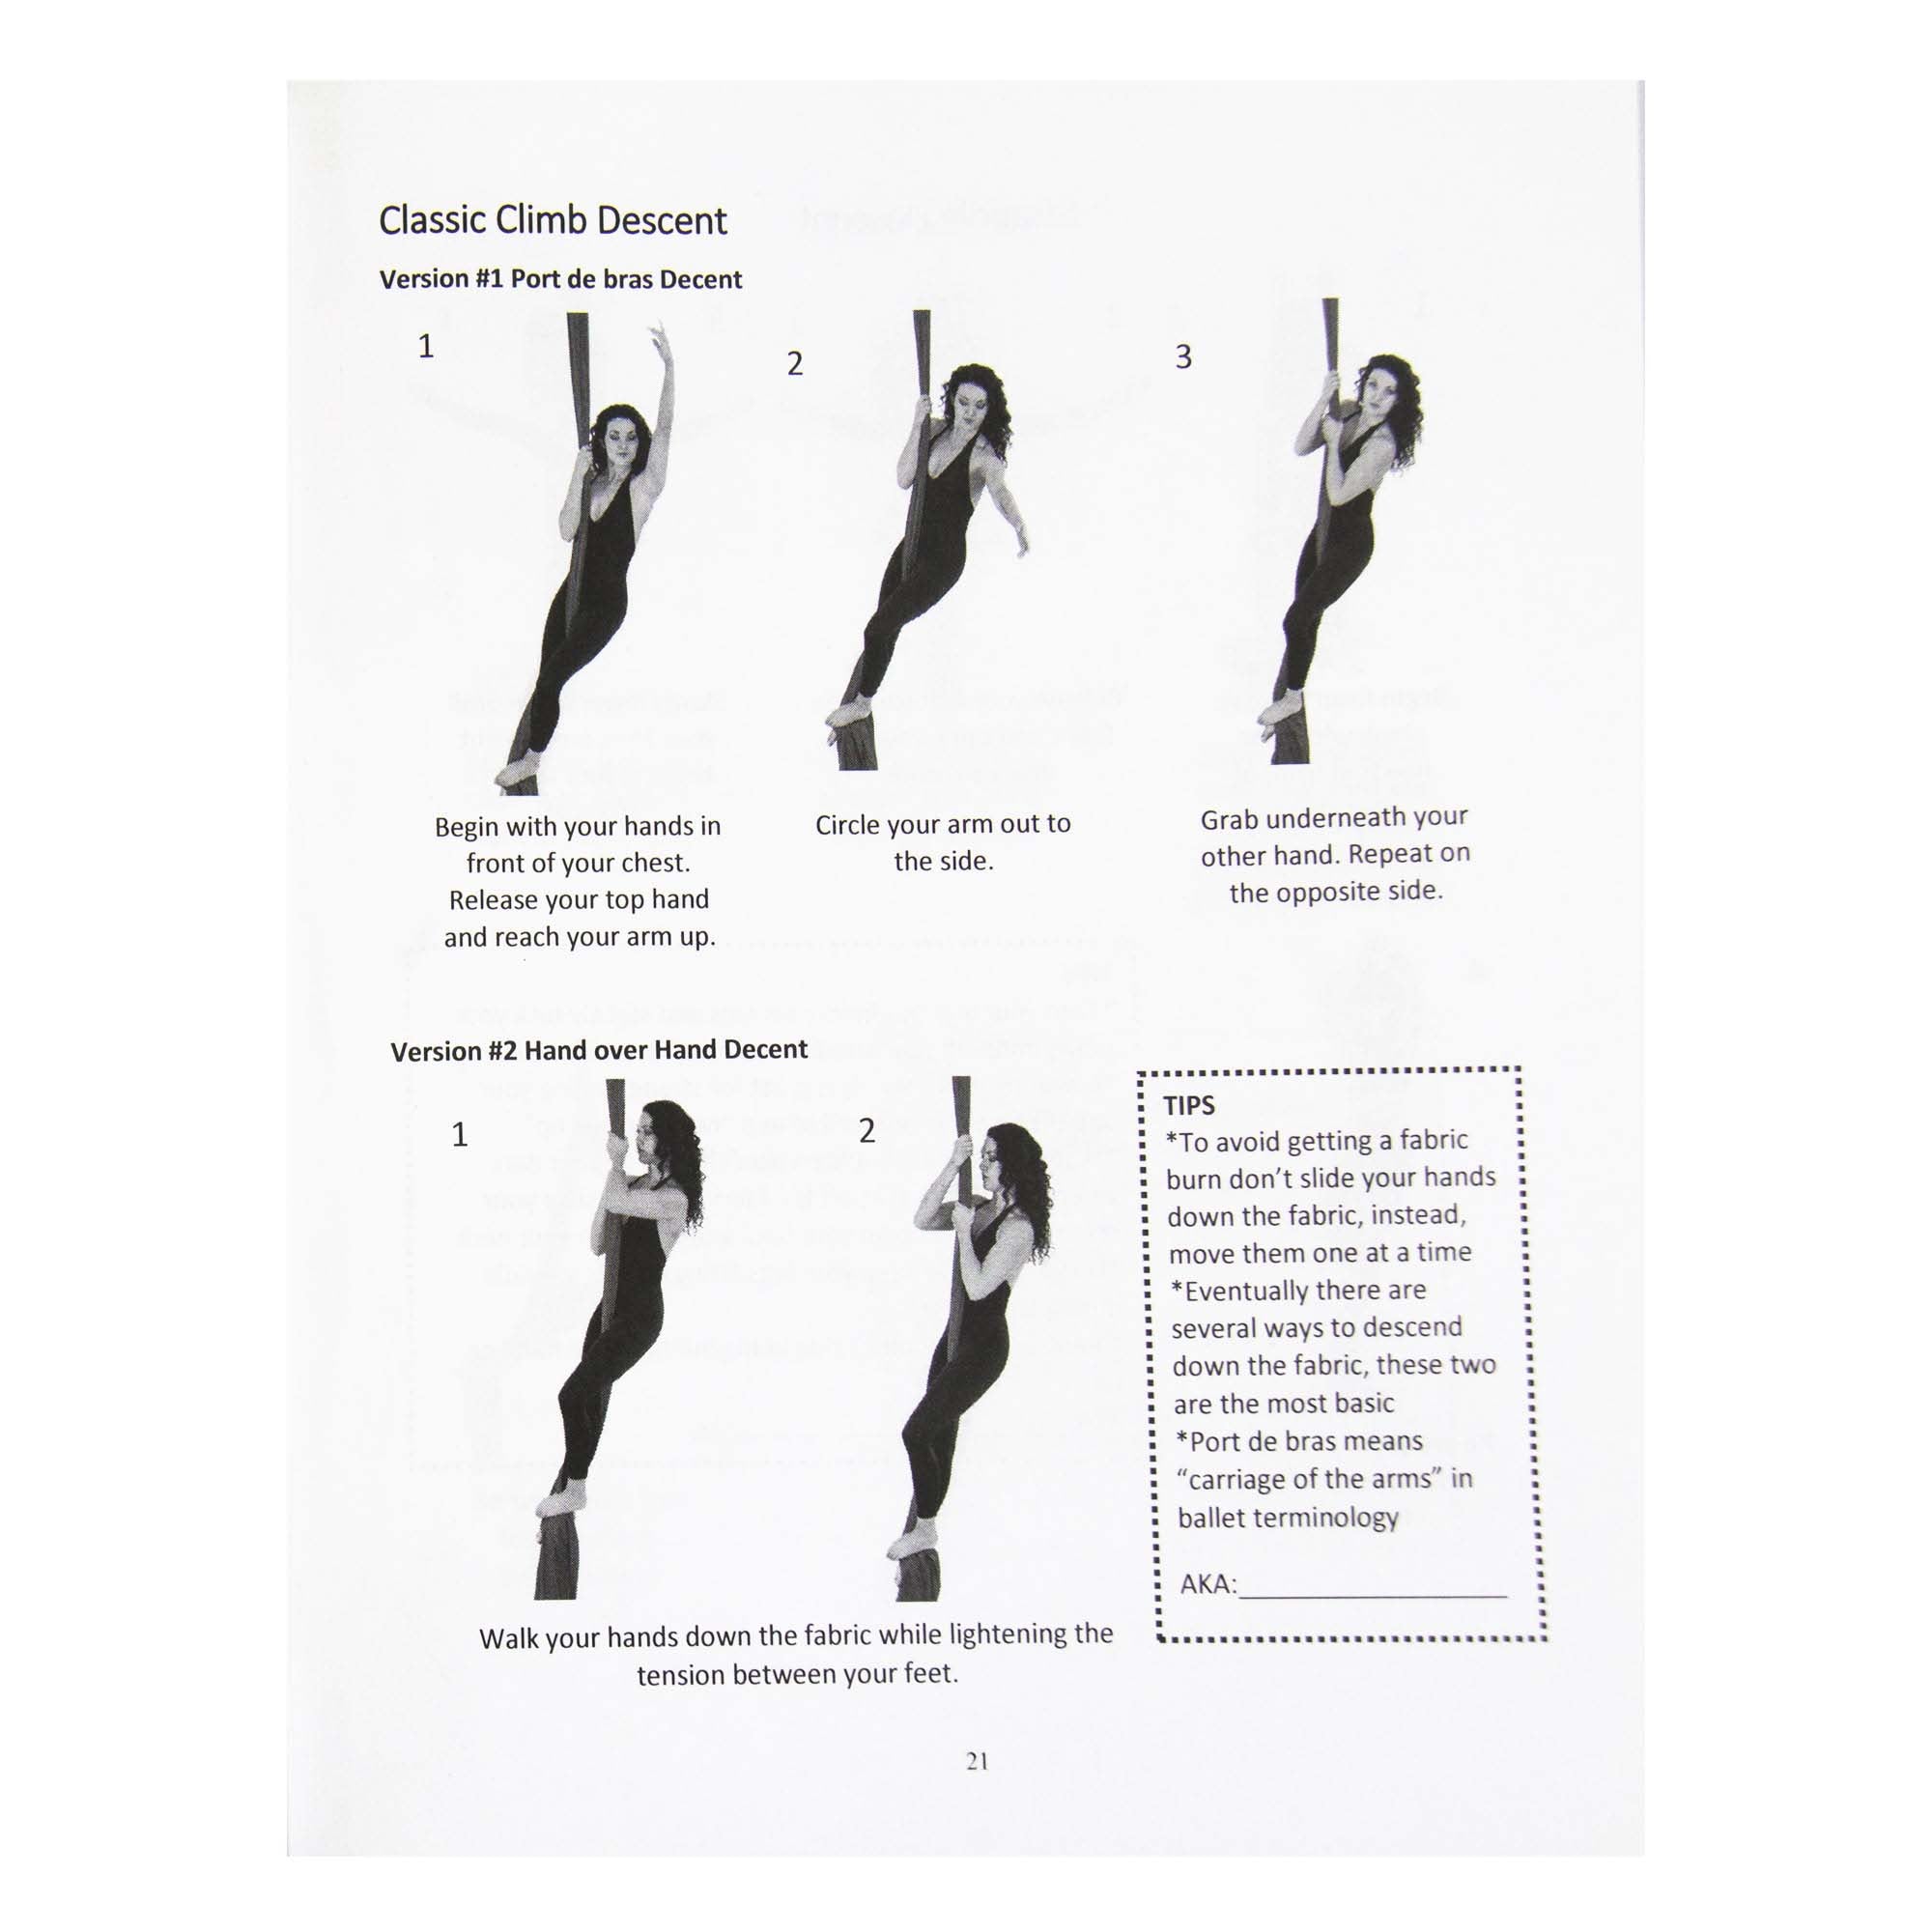 Intermediate Guide to Aerial Silk example page showing a classic climb descent with black and white photos, text, and tips.